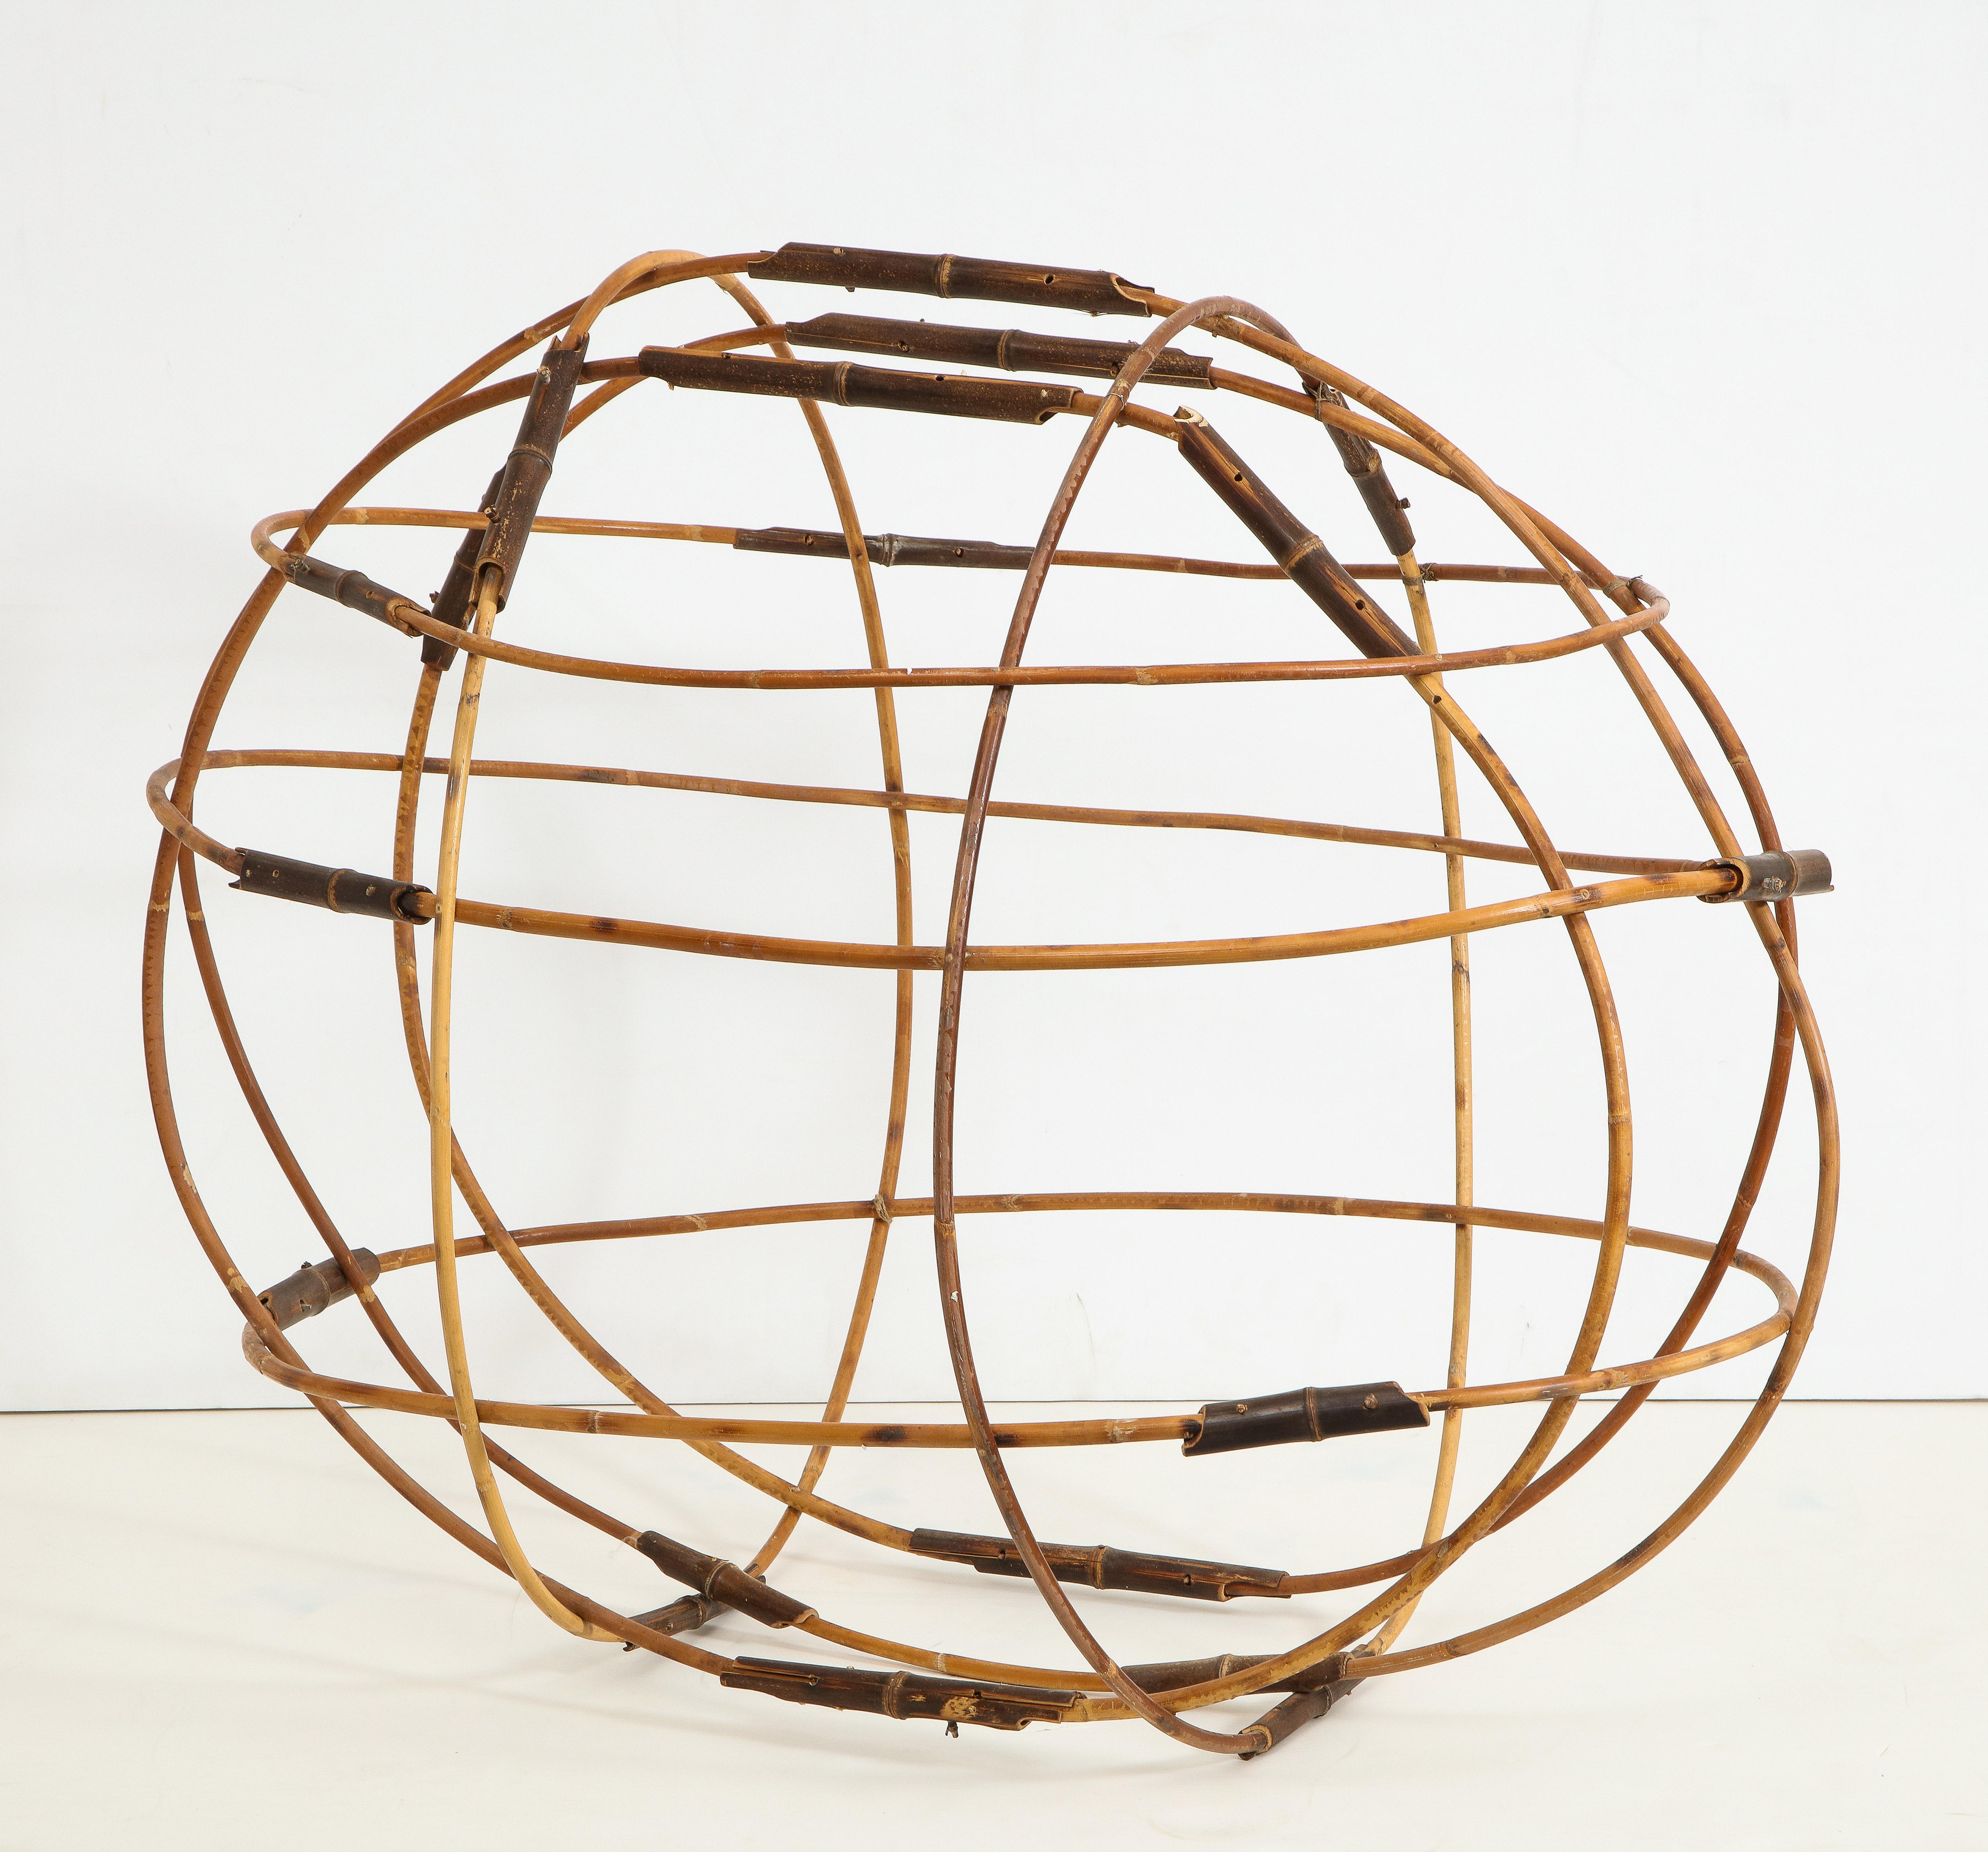 Folk art style oval/elliptical bamboo sculpture, contemporary. Lengths of lighter colored bamboo form the larger ovals with short pieces of darker bamboo accent. Airy and natural.